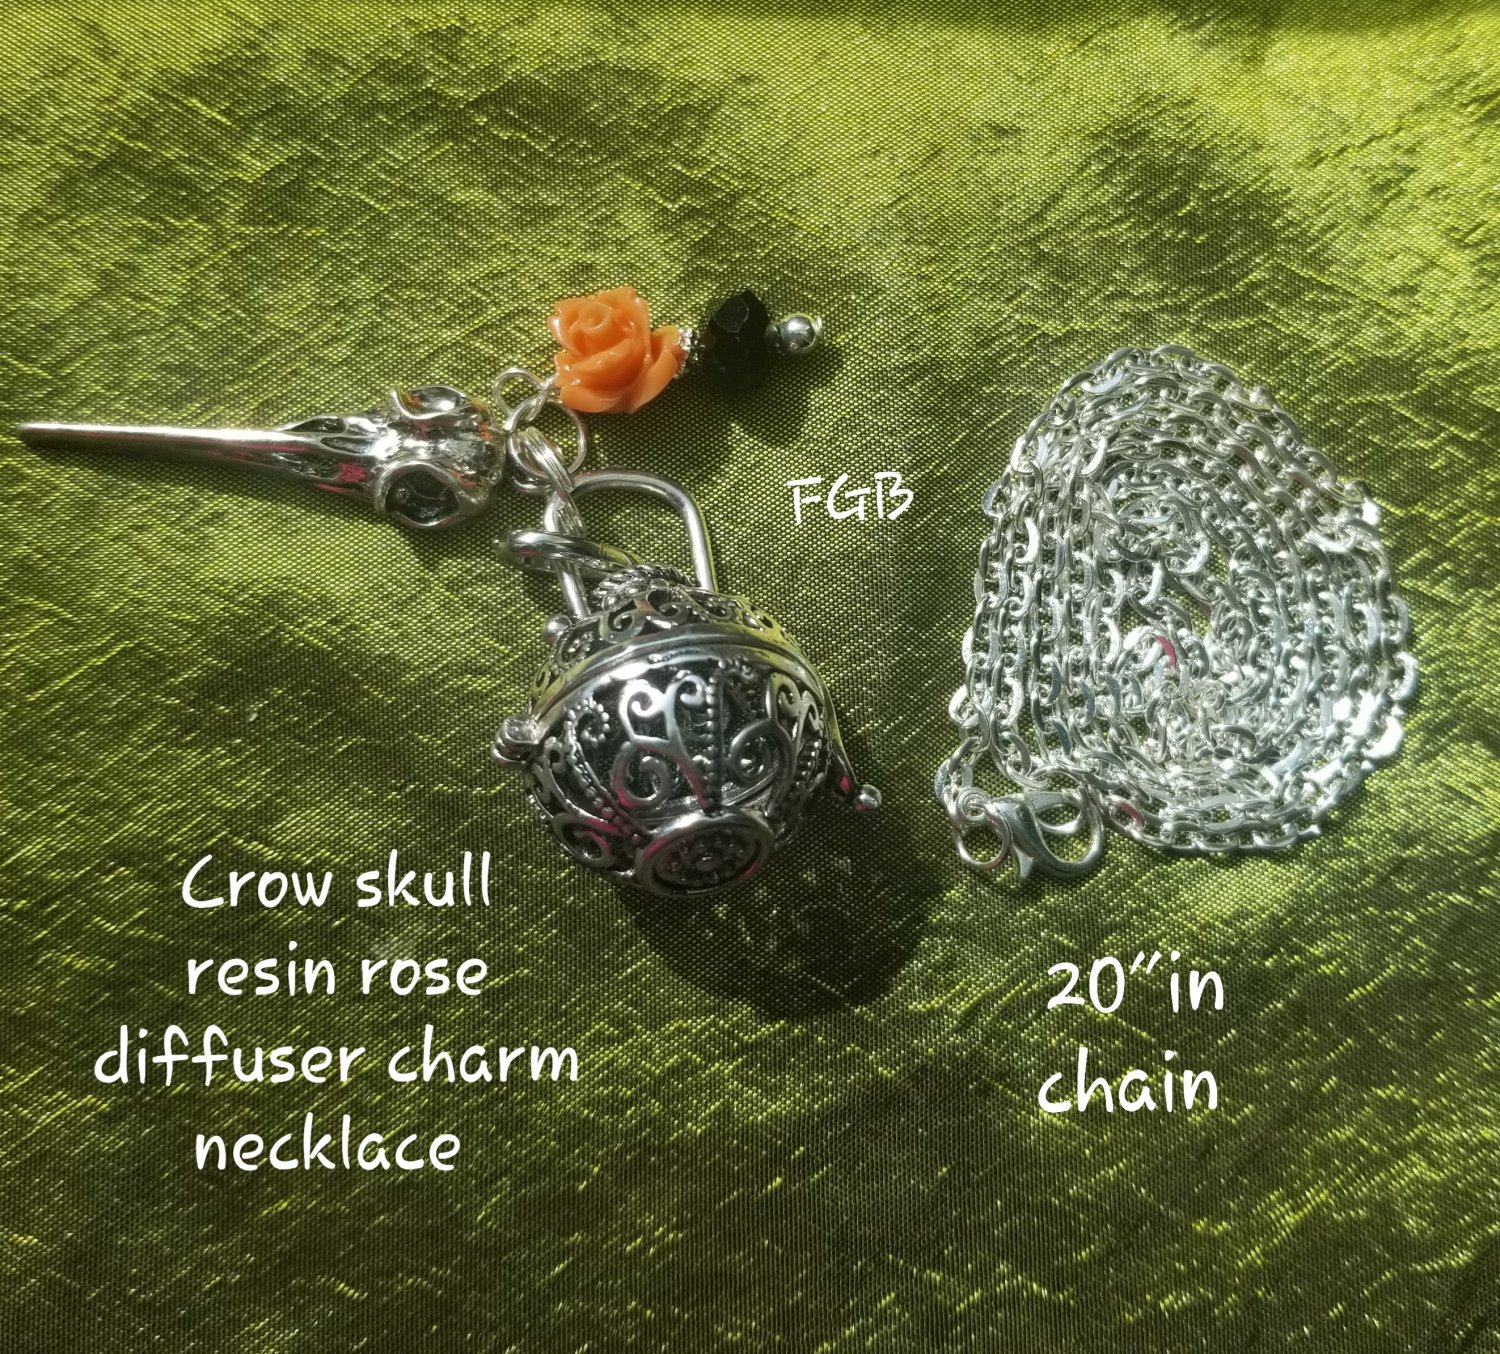 Crow skull rose diffuser necklace